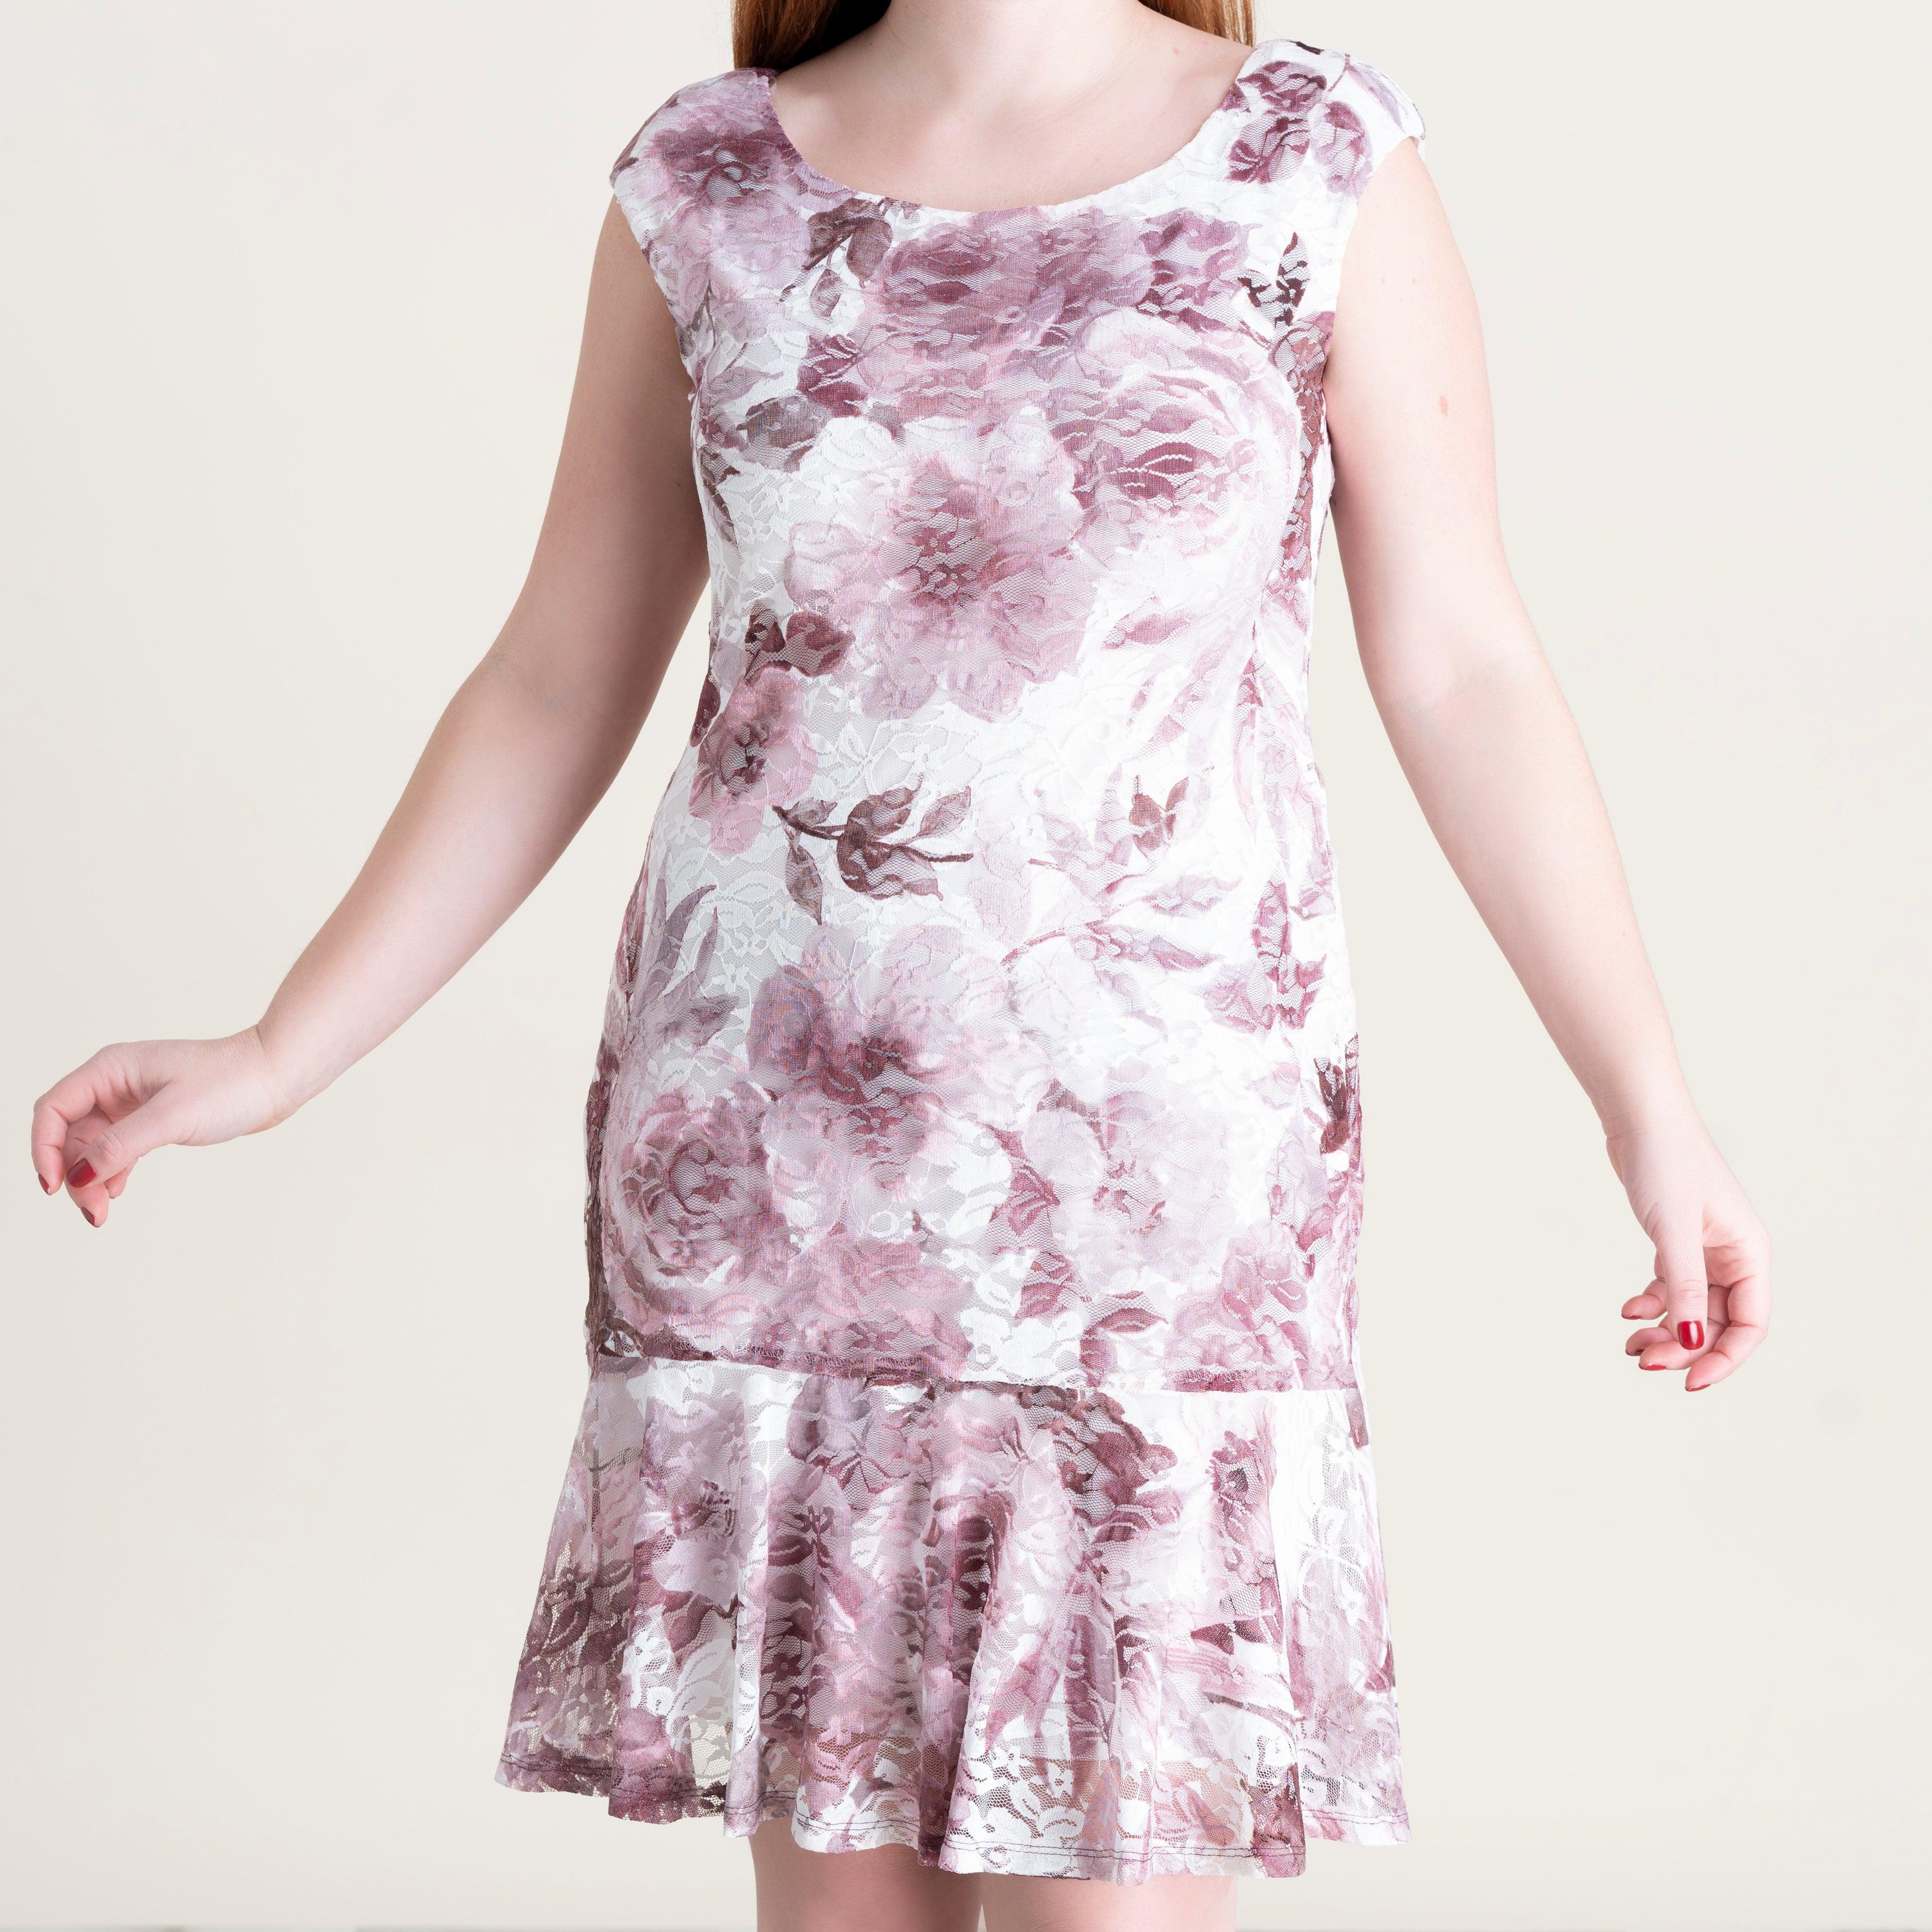 Woman posing wearing Ivory Jessie Printed Lace Dress from Connected Apparel